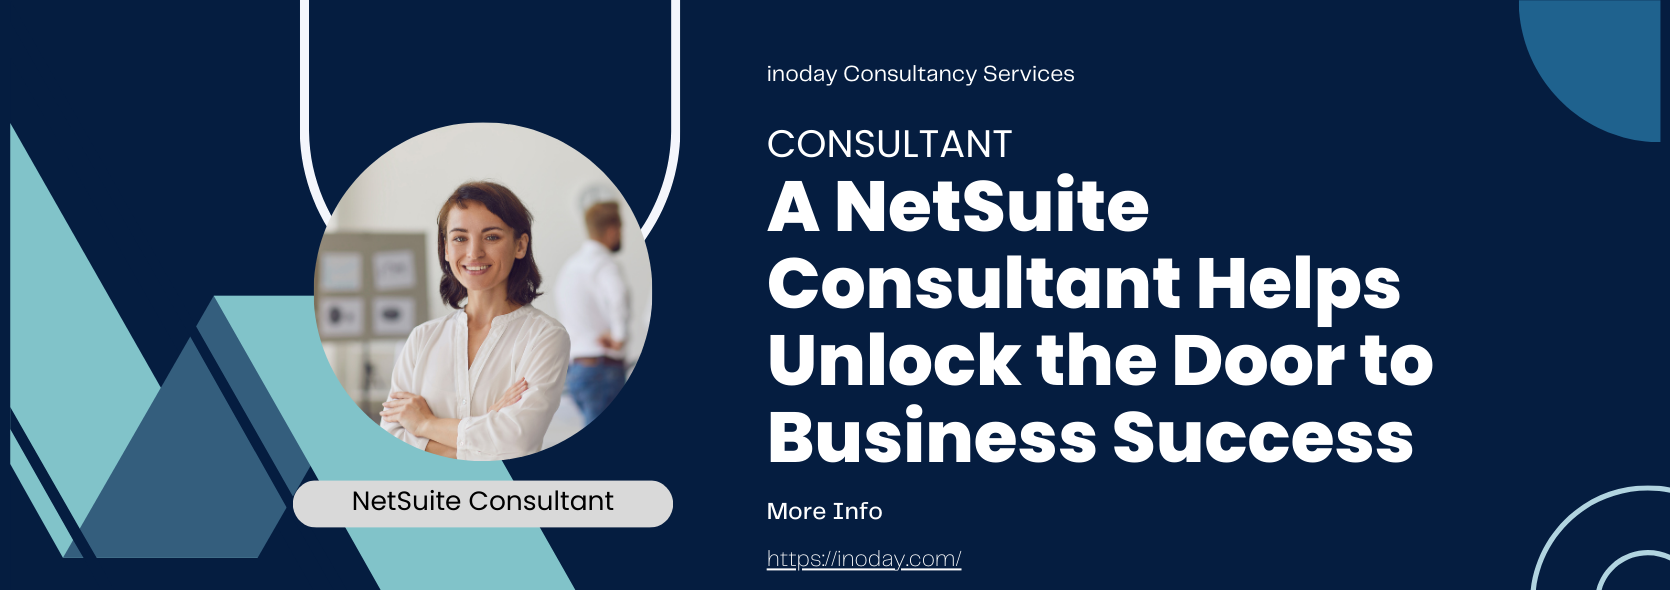 A NetSuite Consultant Helps Unlock the Door to Business Success